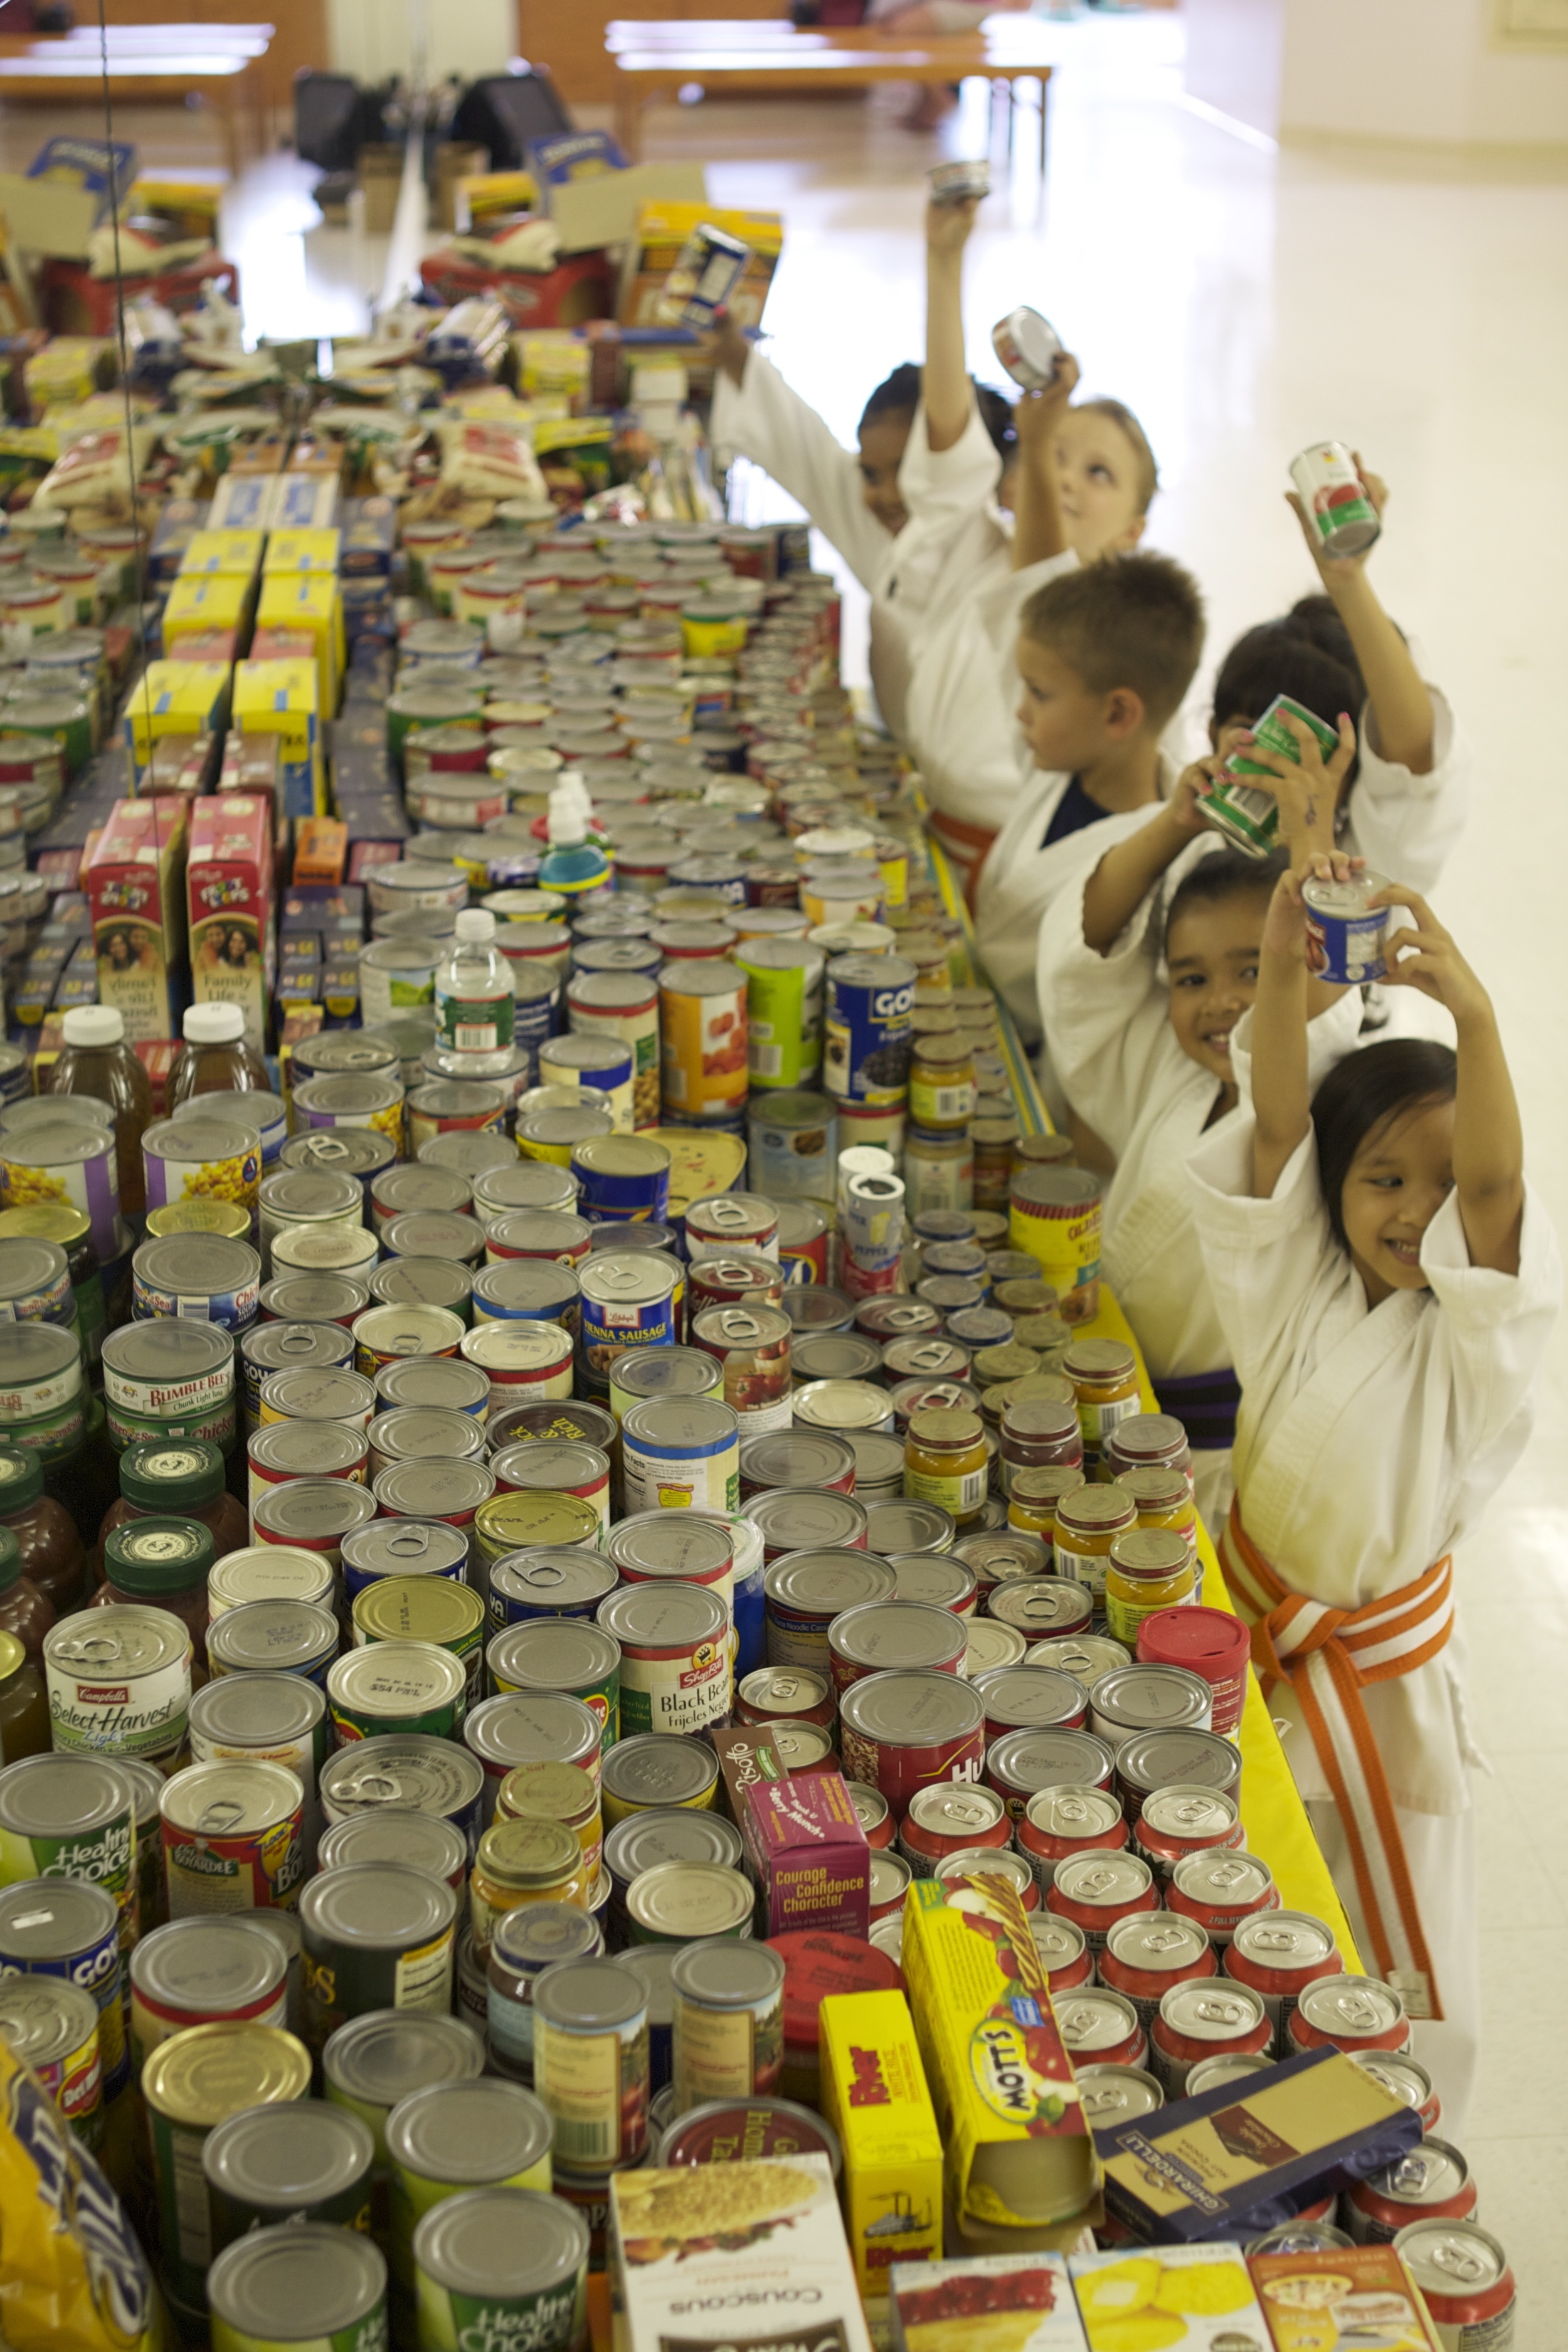 thedojo-food-drive-martial-arts-karate-kids-doing-community-service-in-rutherford-nj_14667888441_o.jpg